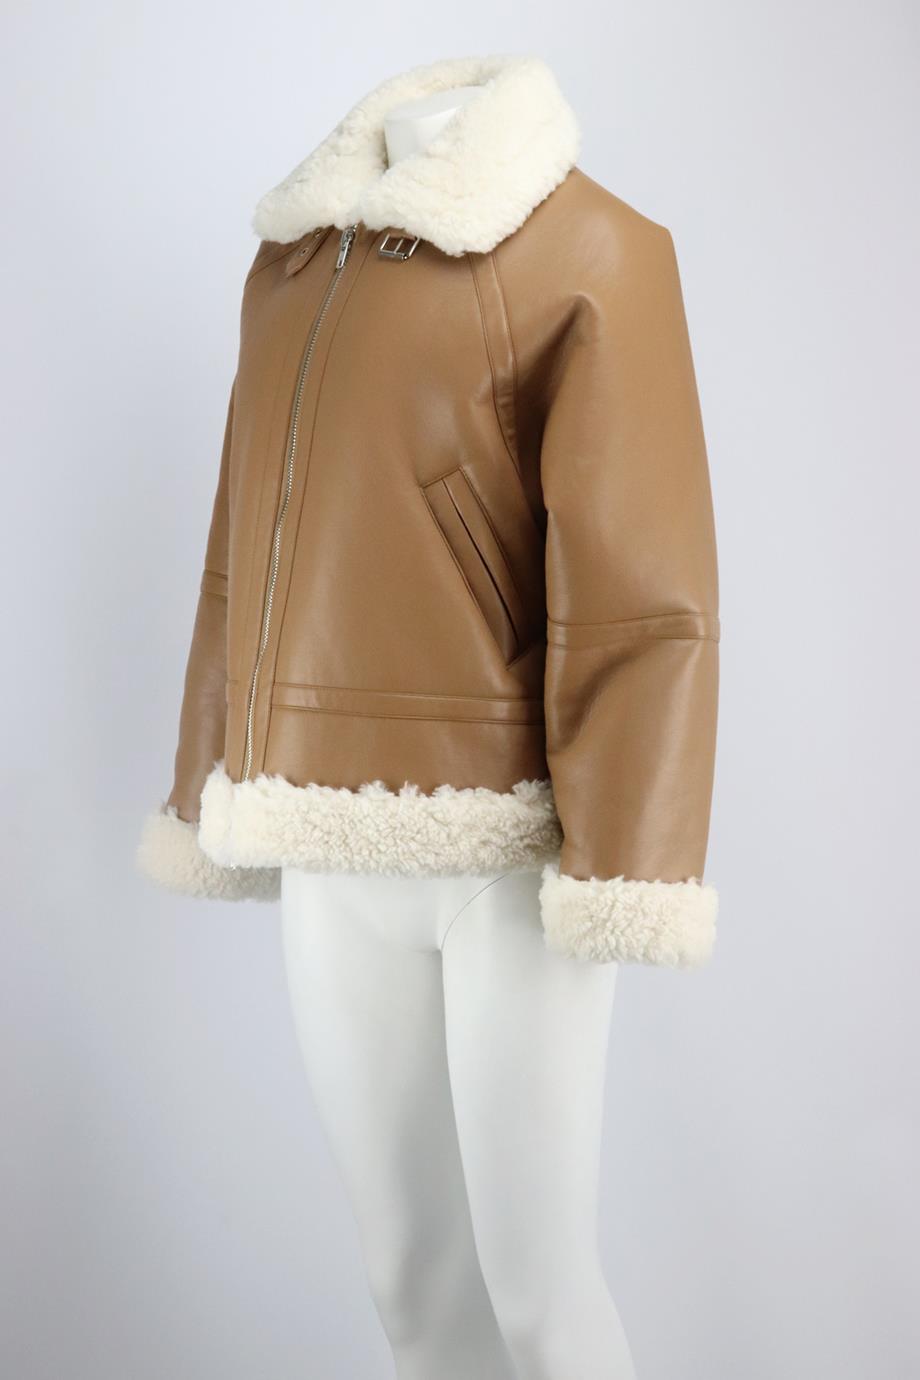 STAND STUDIO RIND FAUX SHEARLING JACKET SMALL